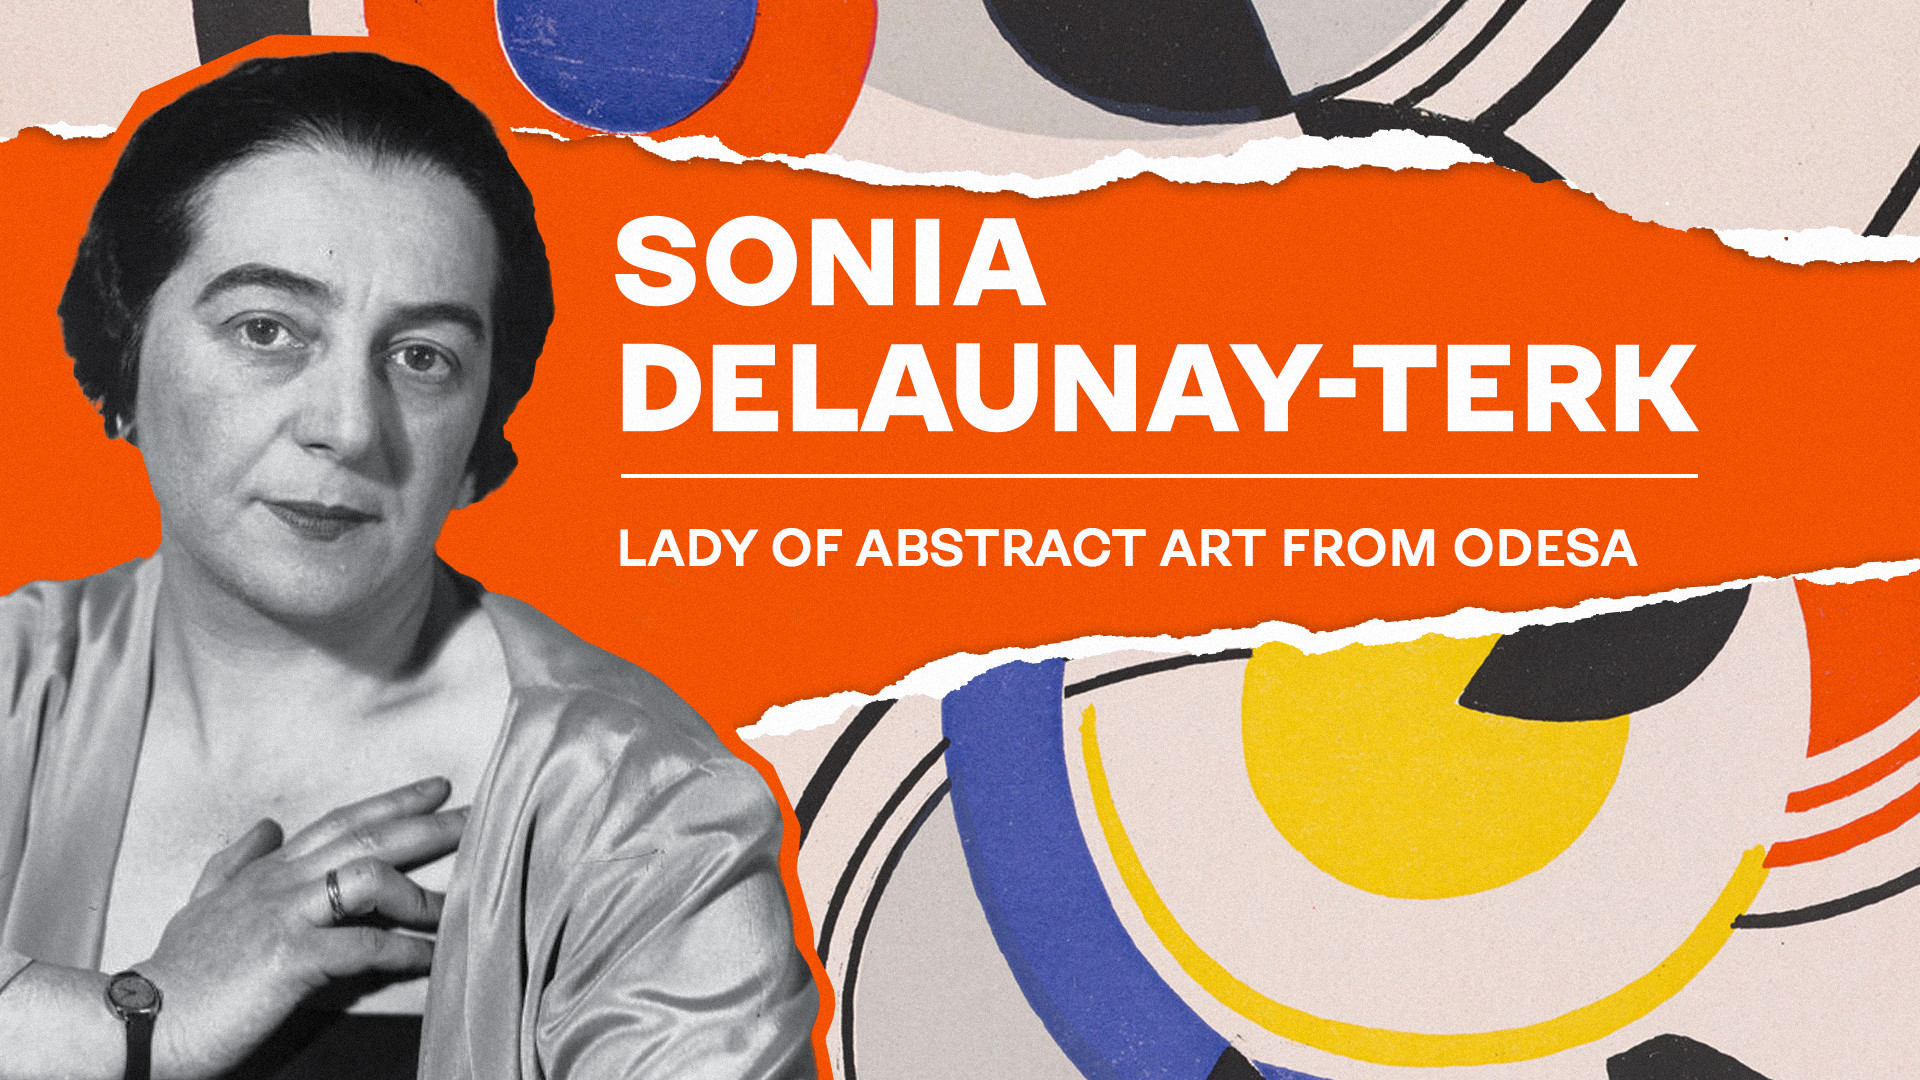 (Un)celebrated Ukrainians Who Changed the Course of History: SONIA DELAUNAY TERK